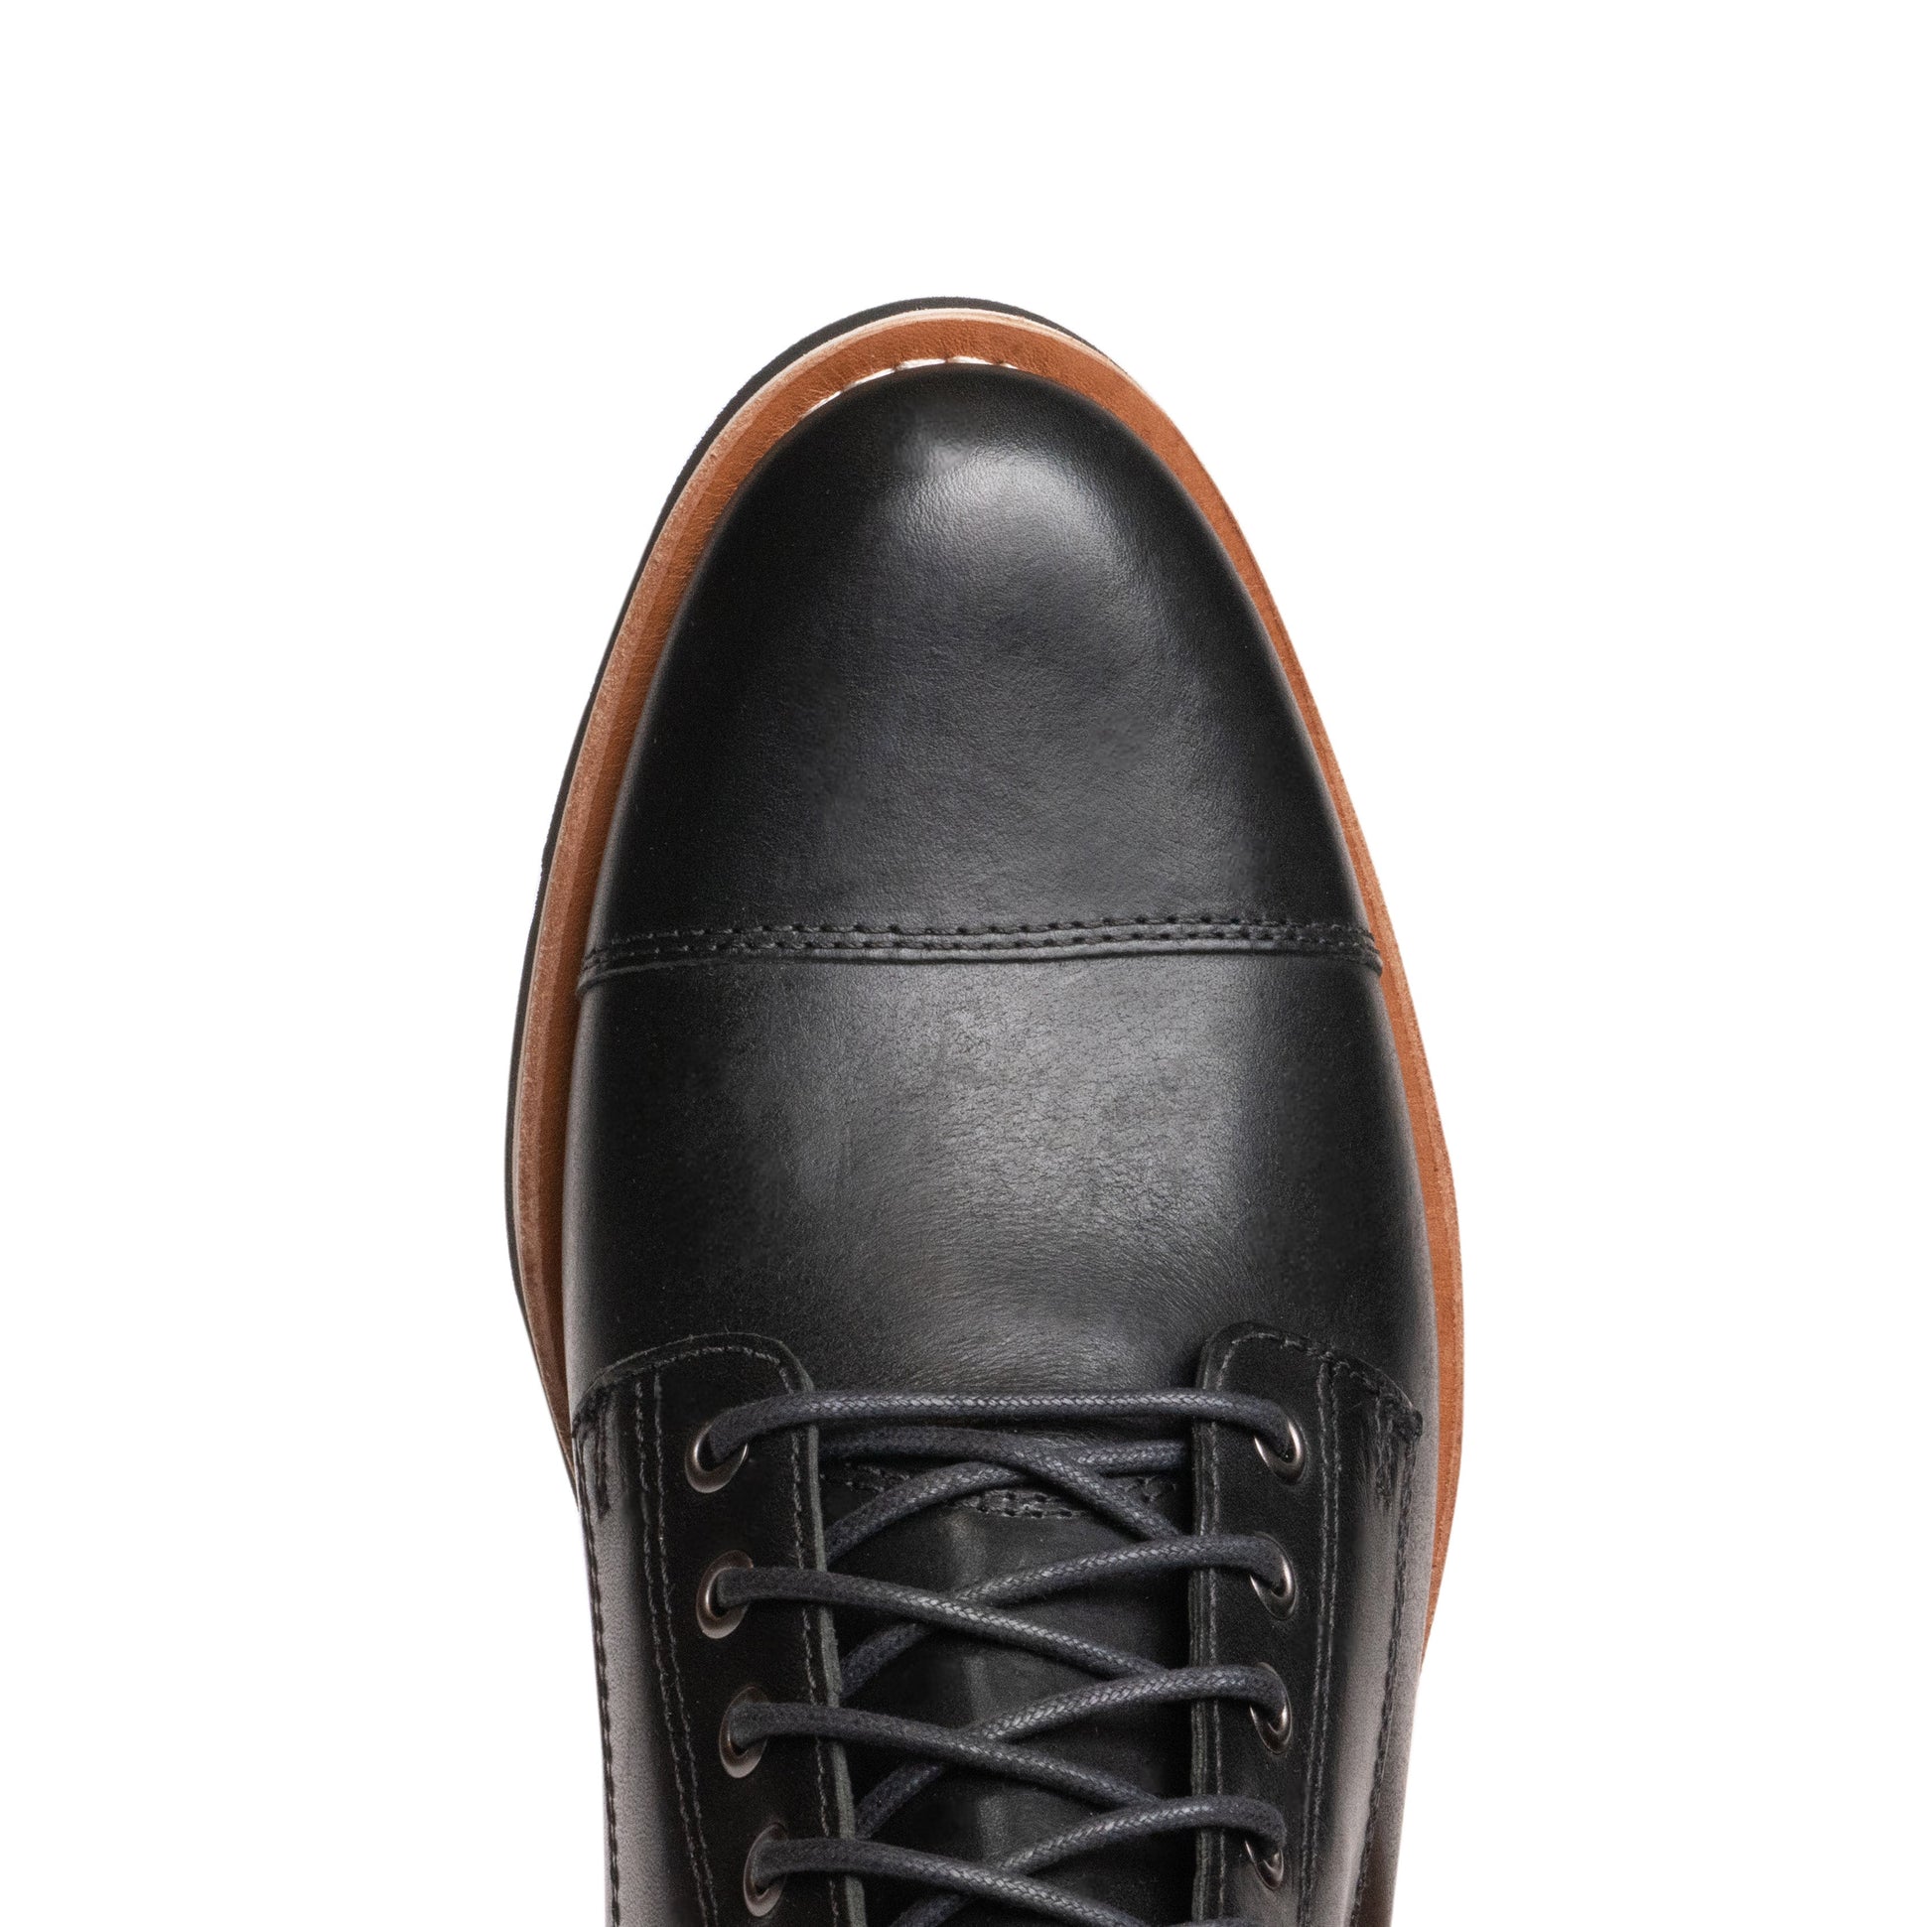 HELM Boots The Death & Co. The Lou Black Toe